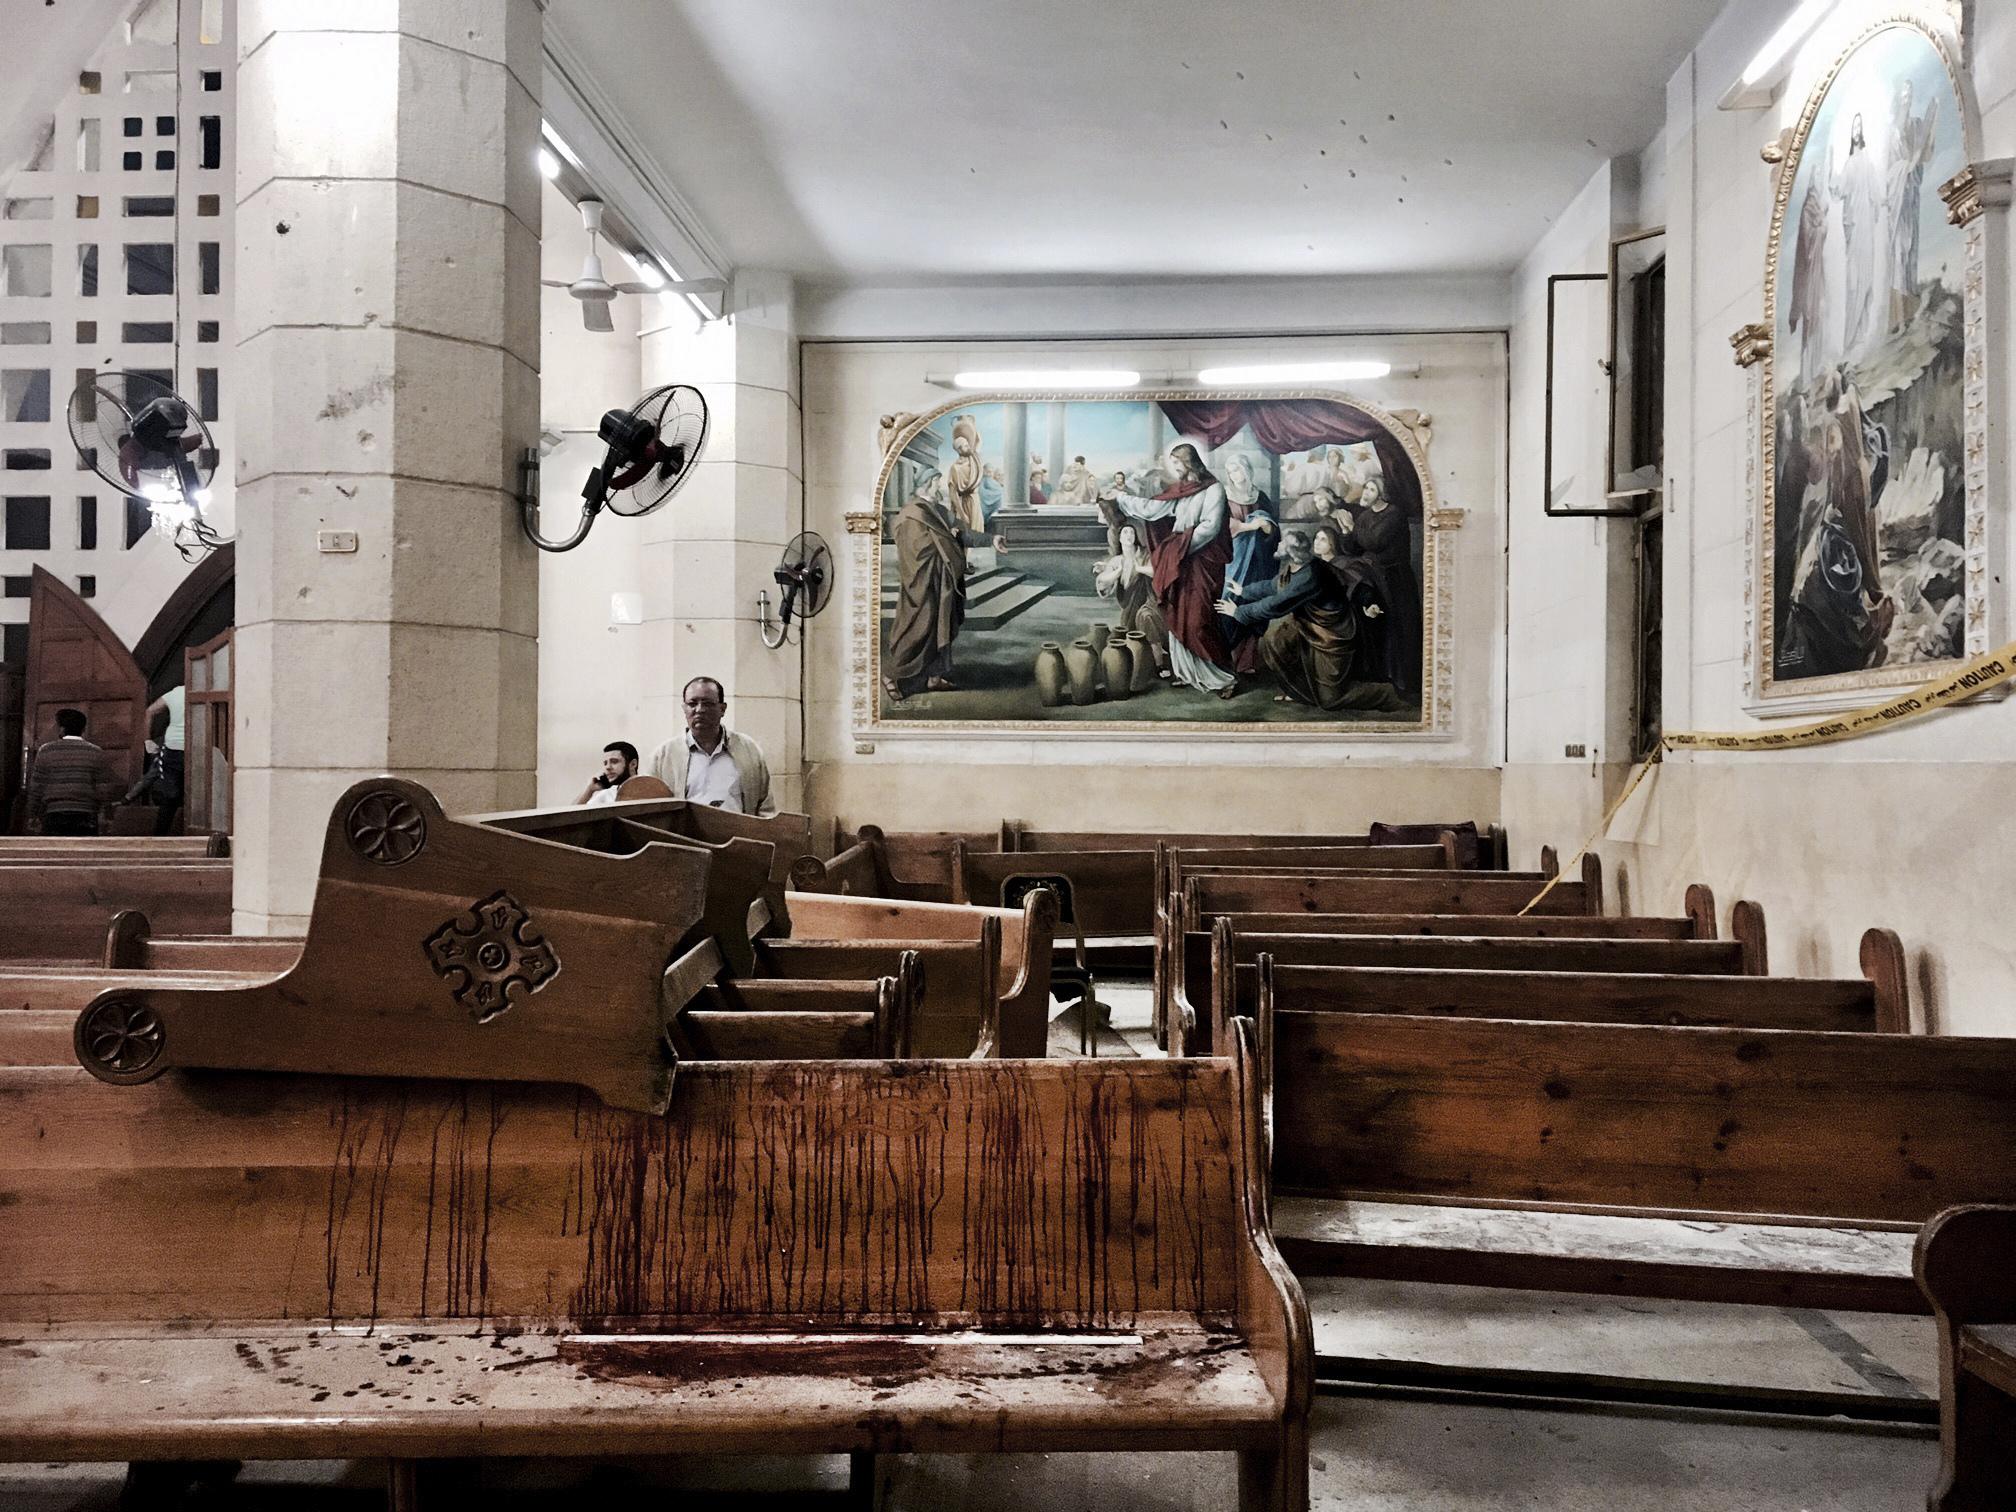 St. George’s Church Tanta twin bombings -   Blood stains pews inside the St. George Church after a...